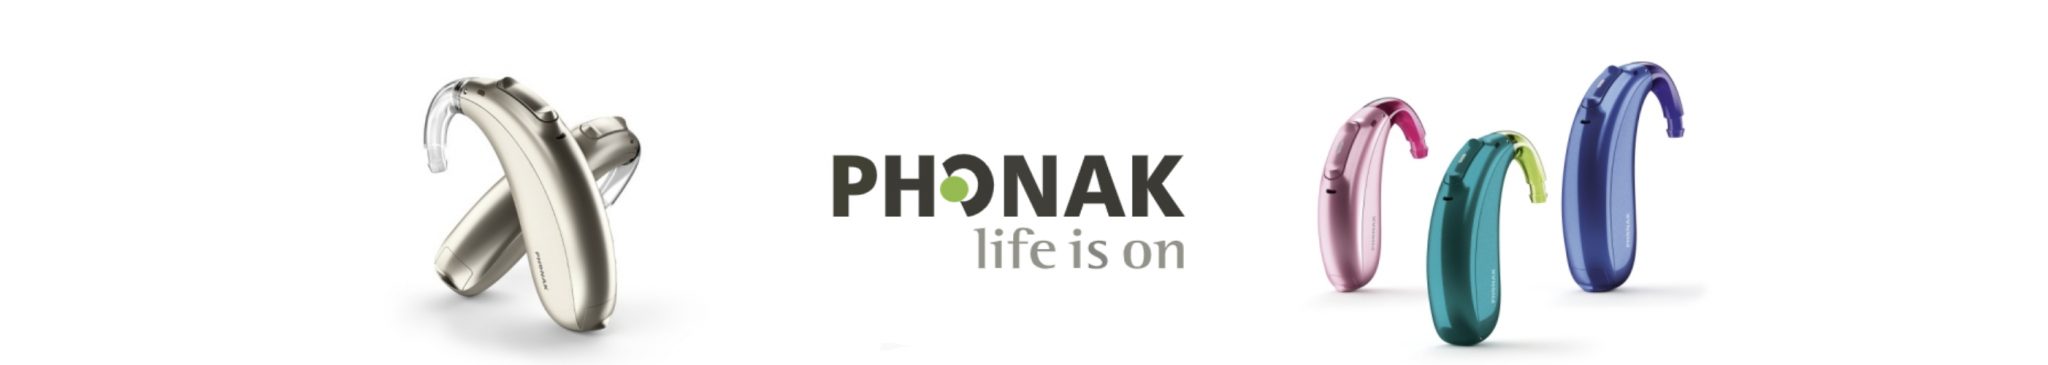 Phonak Hearing Aids in Stoke-on-Trent, Newcastle-under-Lyme and Cheshire